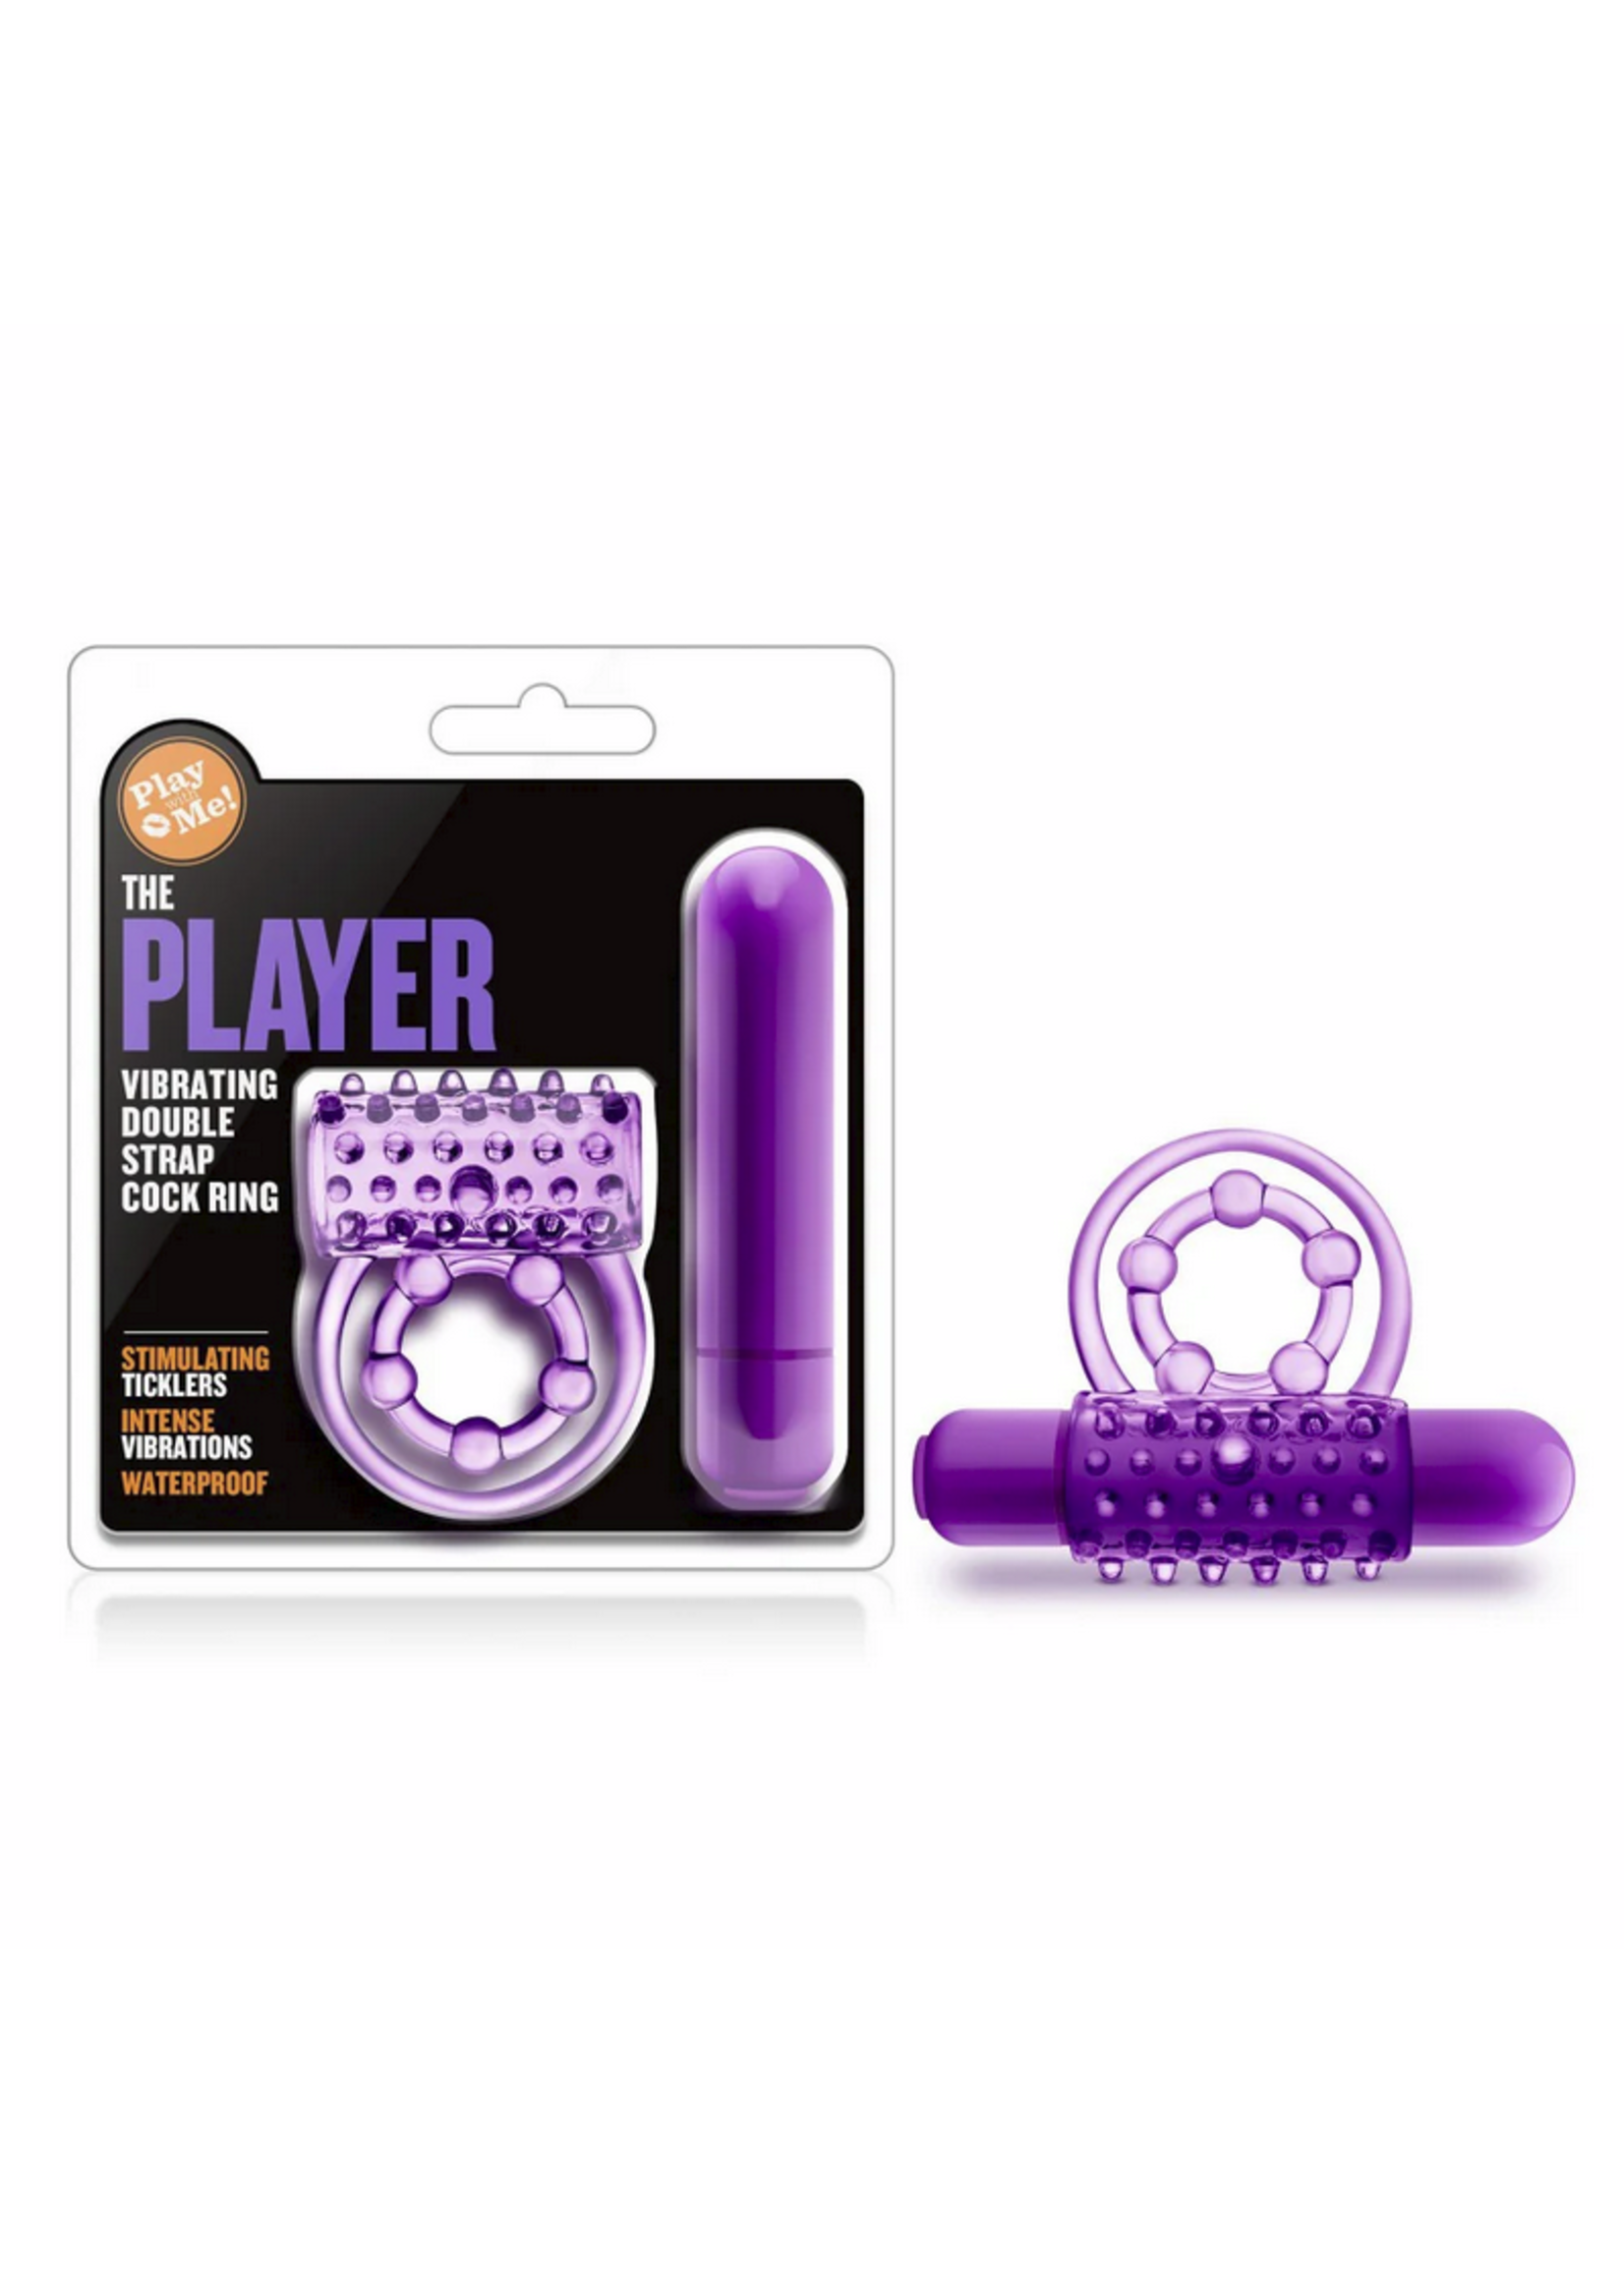 The Player Vibrating Double C-ring